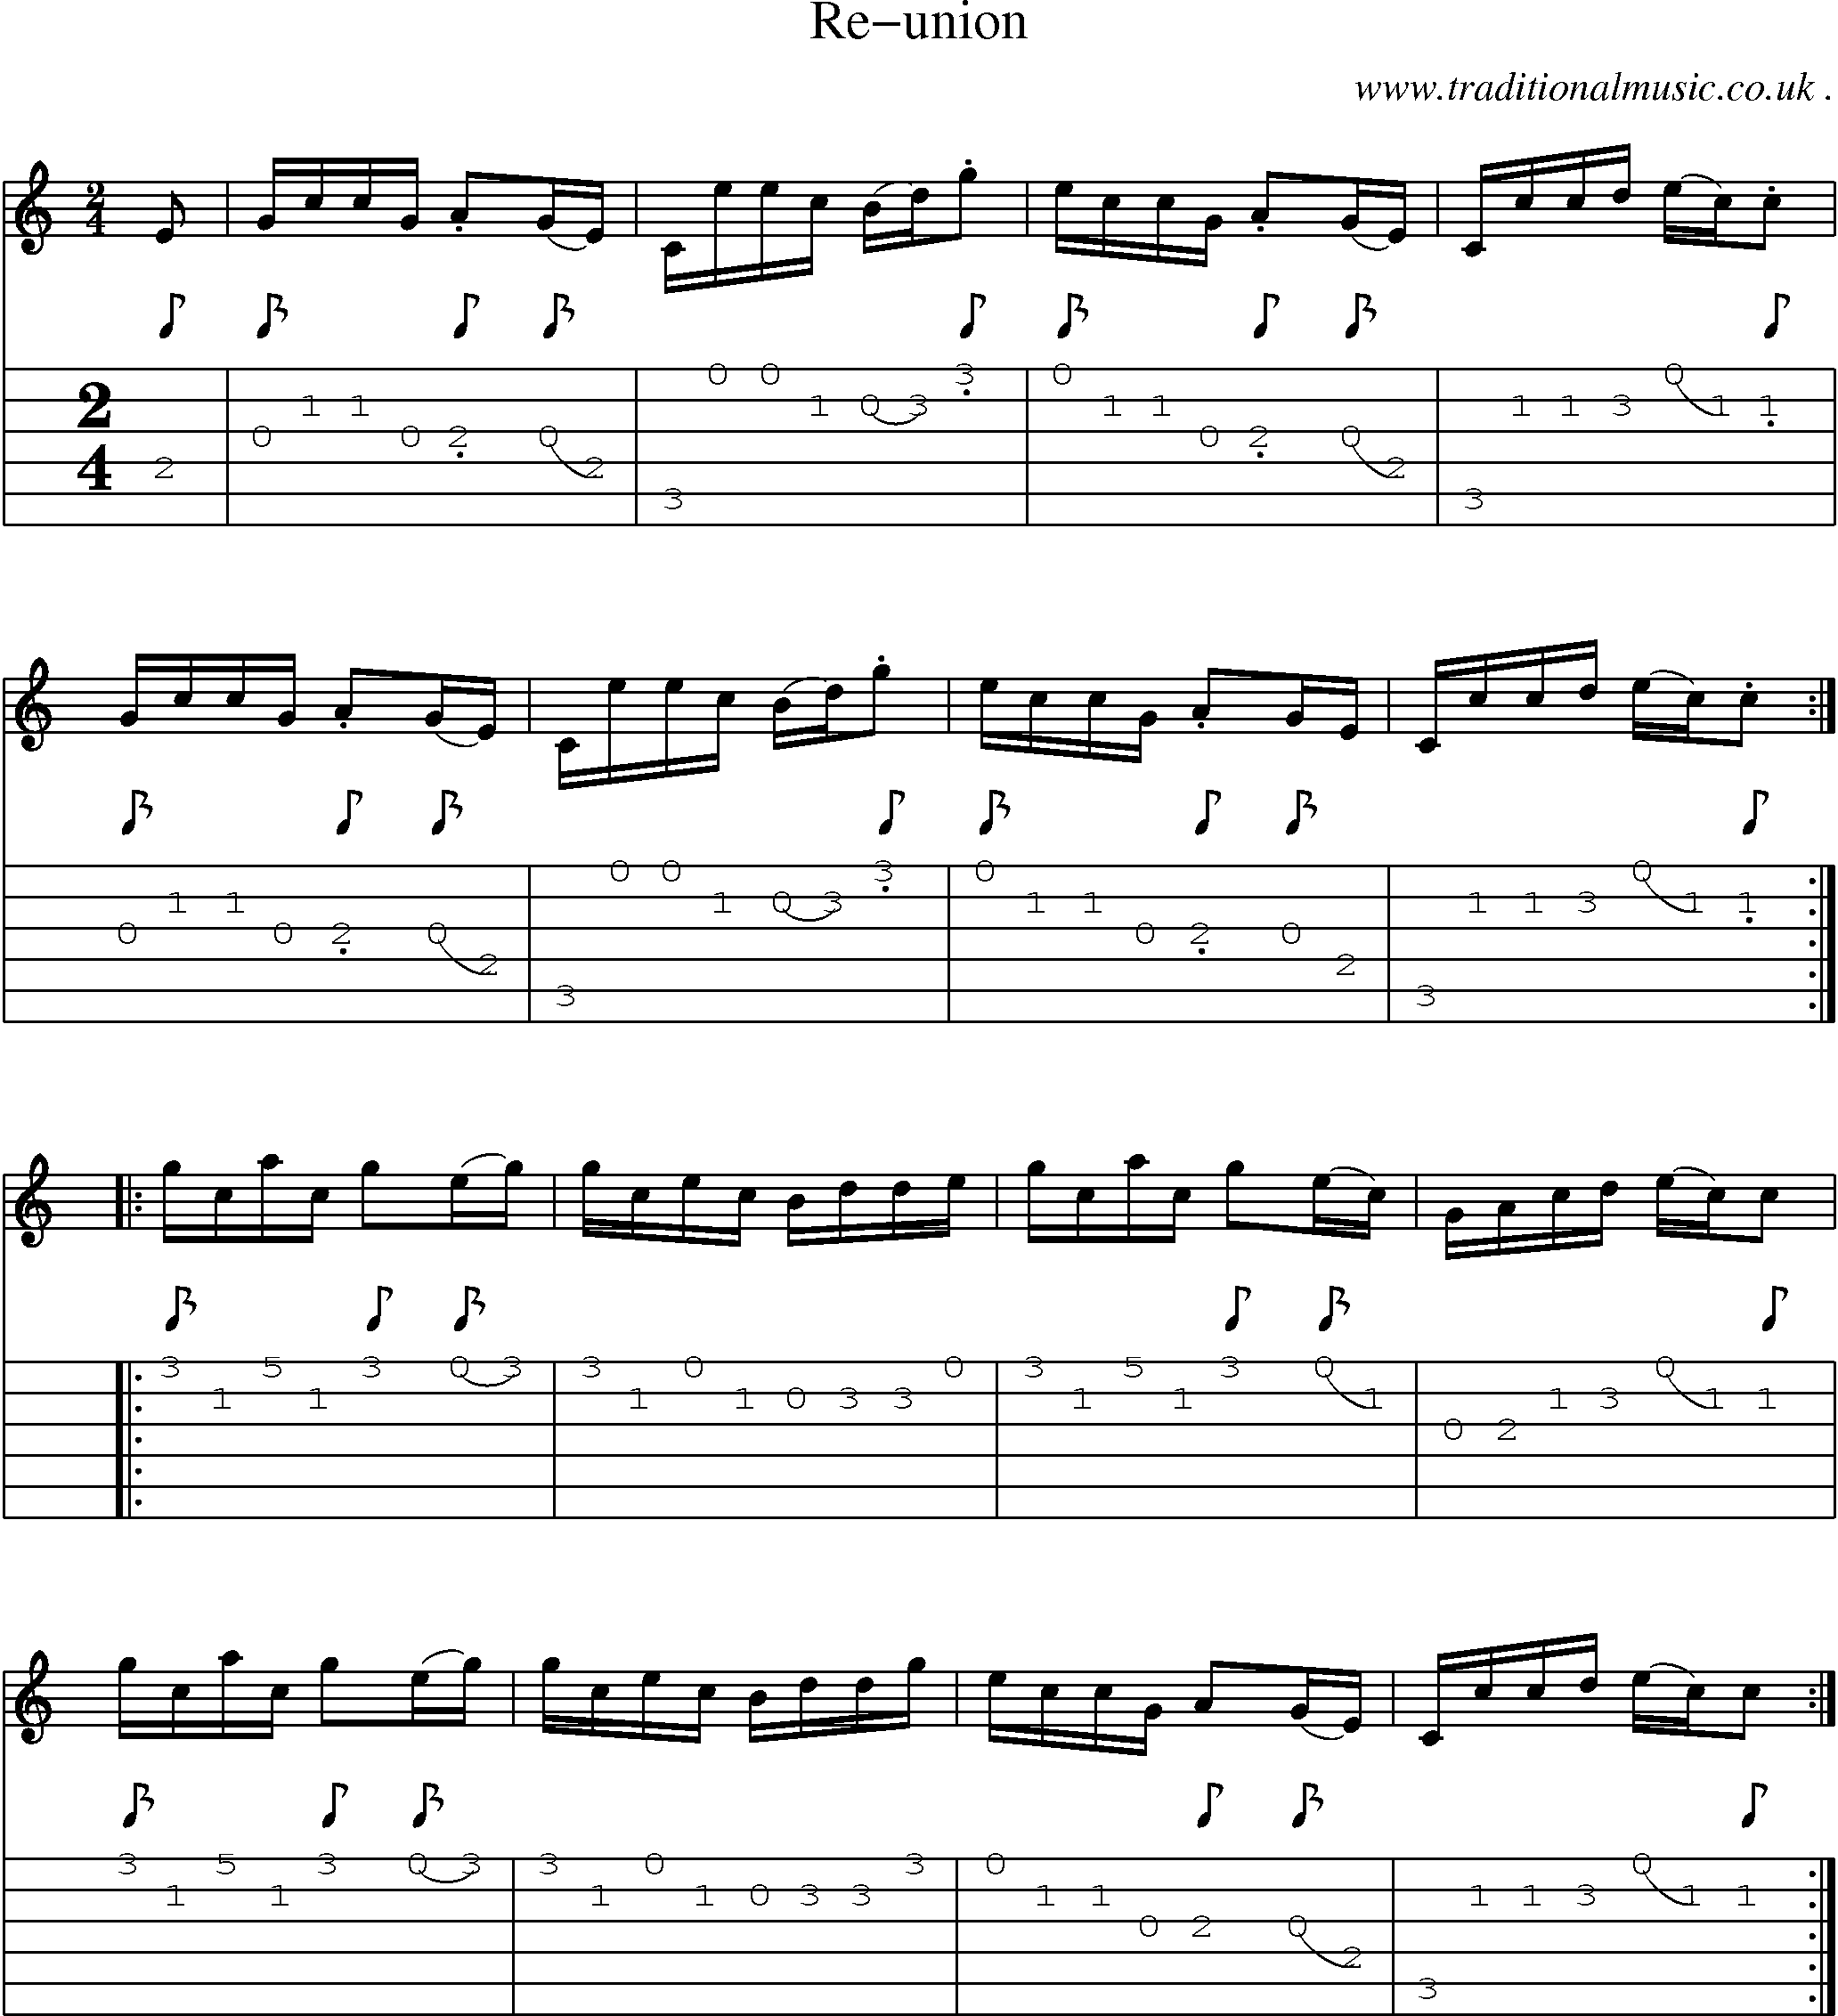 Sheet-Music and Guitar Tabs for Re-union